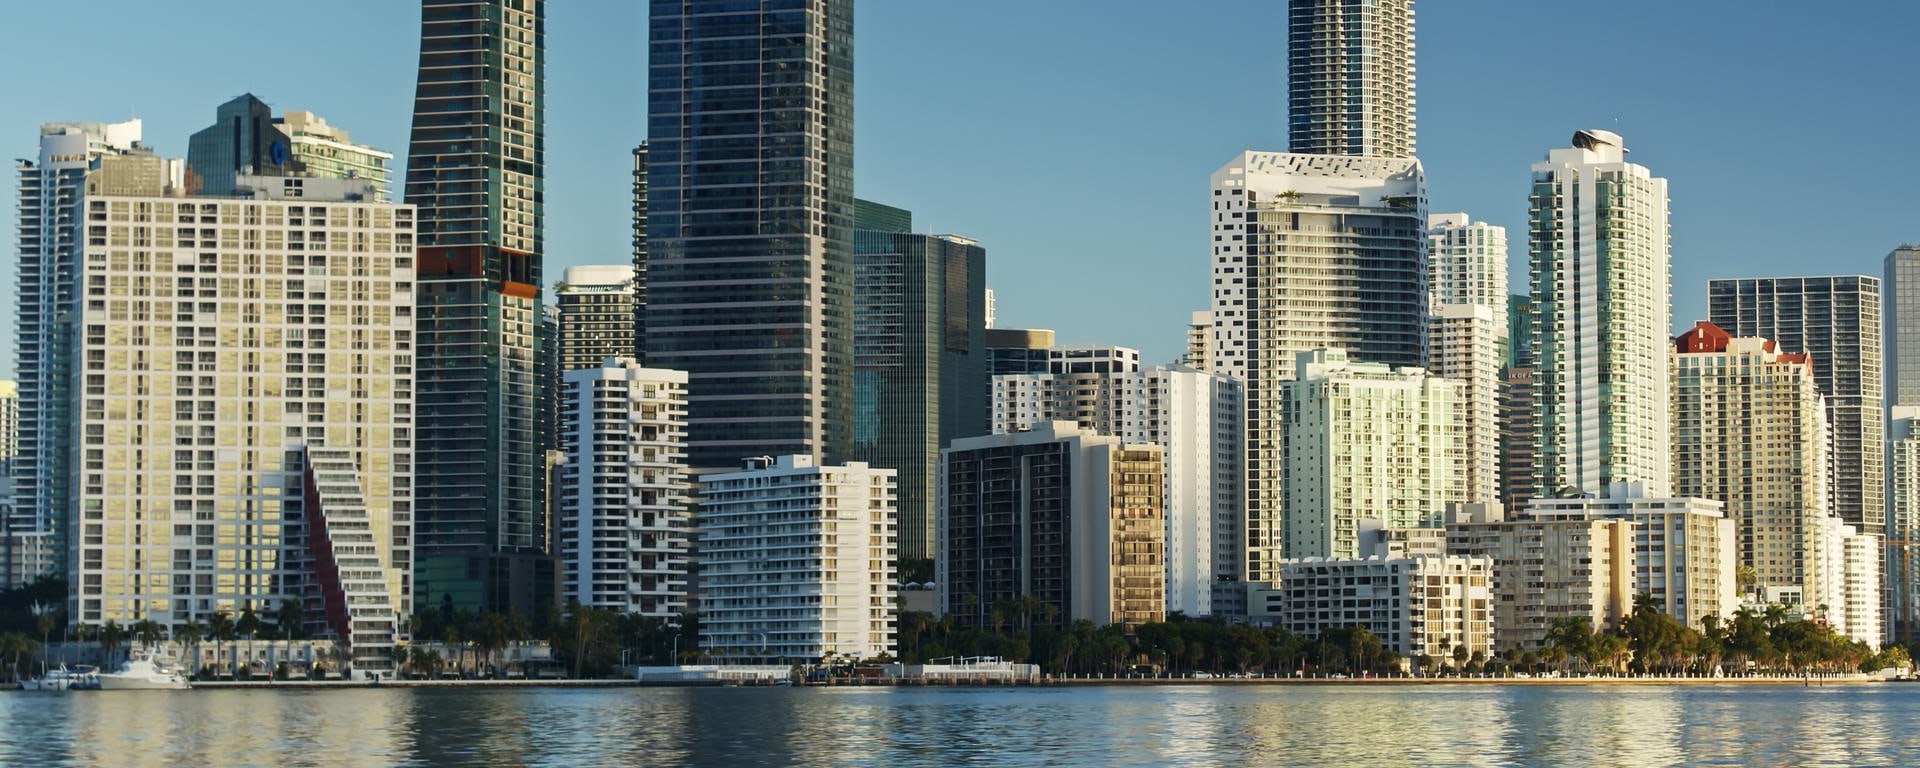 A picture of the city of Miami, where Vontobel Swiss Financial Advisers AG is located